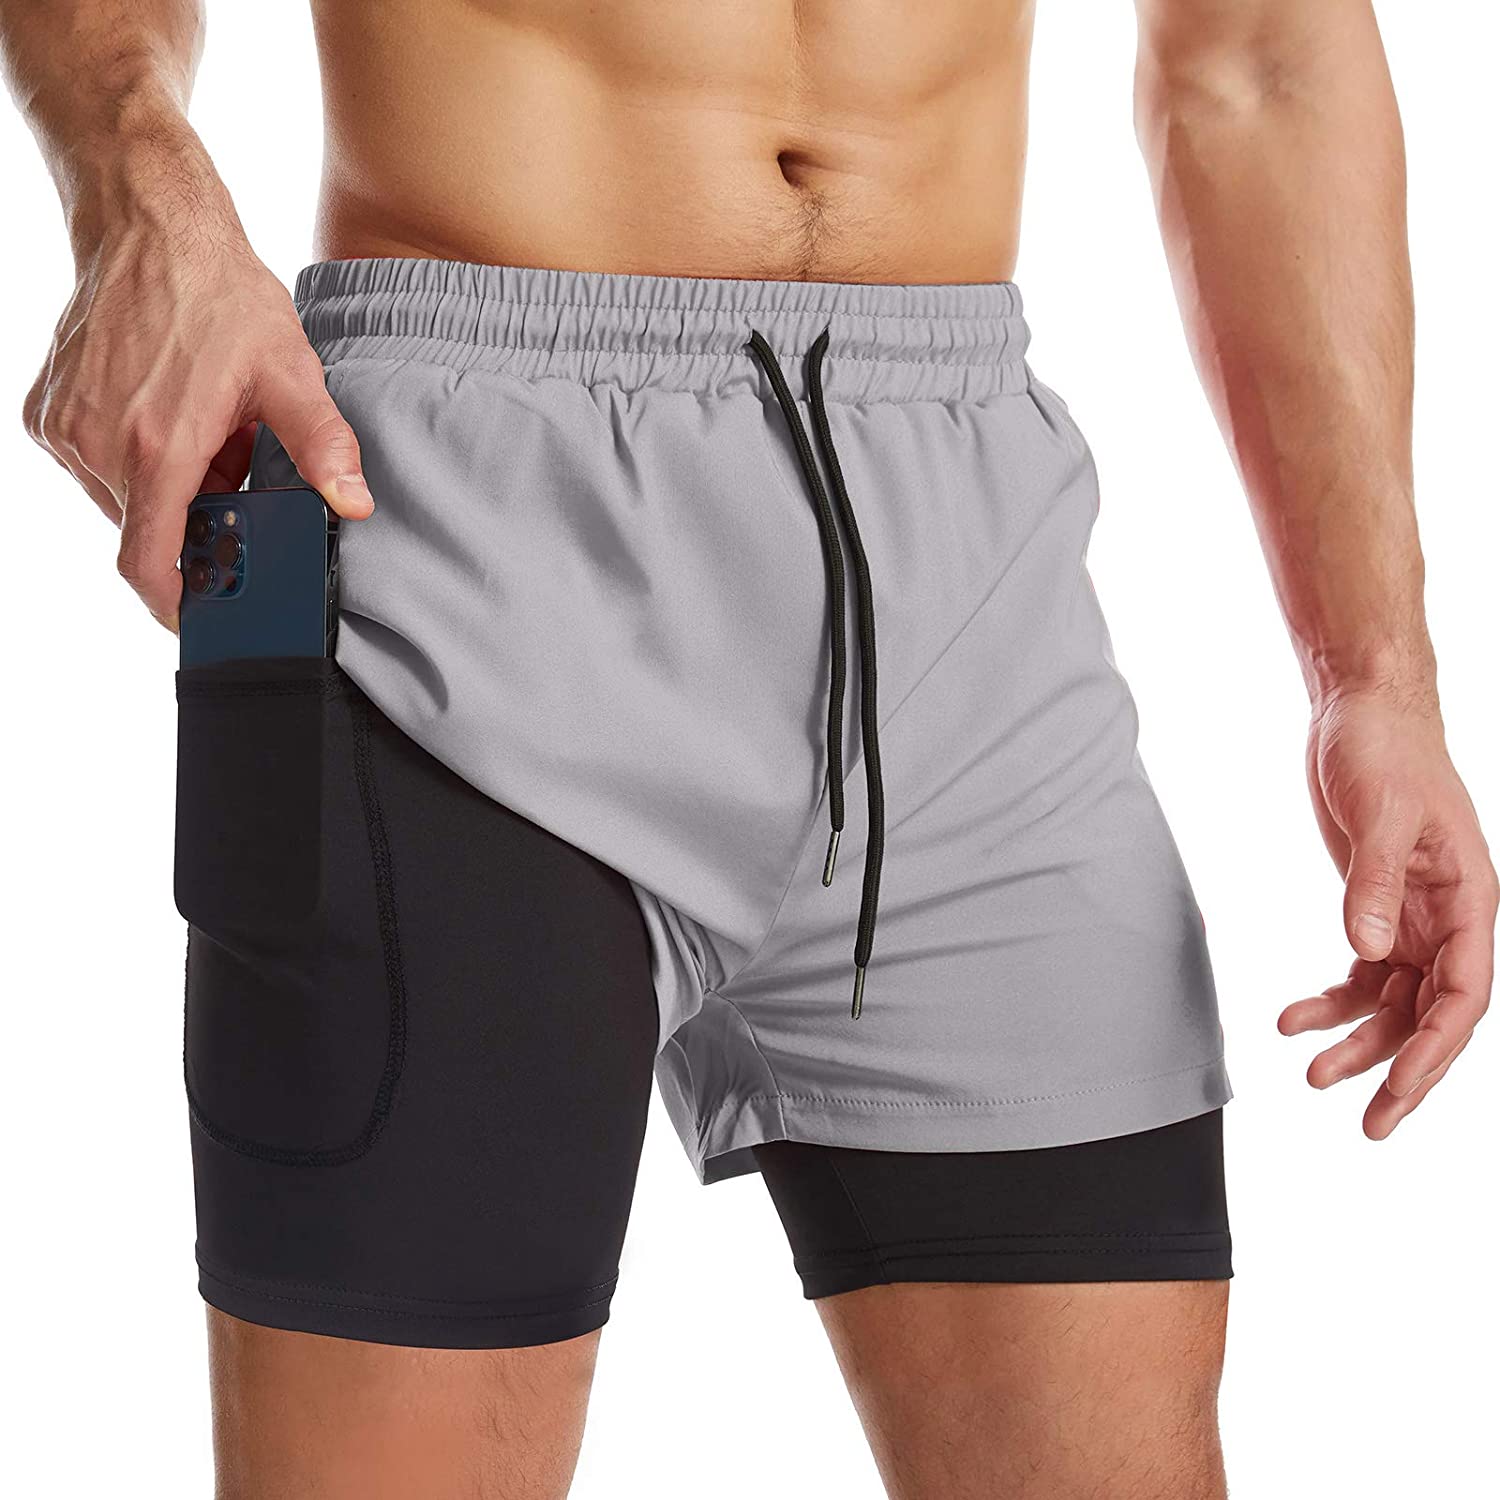 Surenow Mens 2 In 1 Running Shorts Quick Dry Athletic Shorts With Liner Workout 4071 Picclick